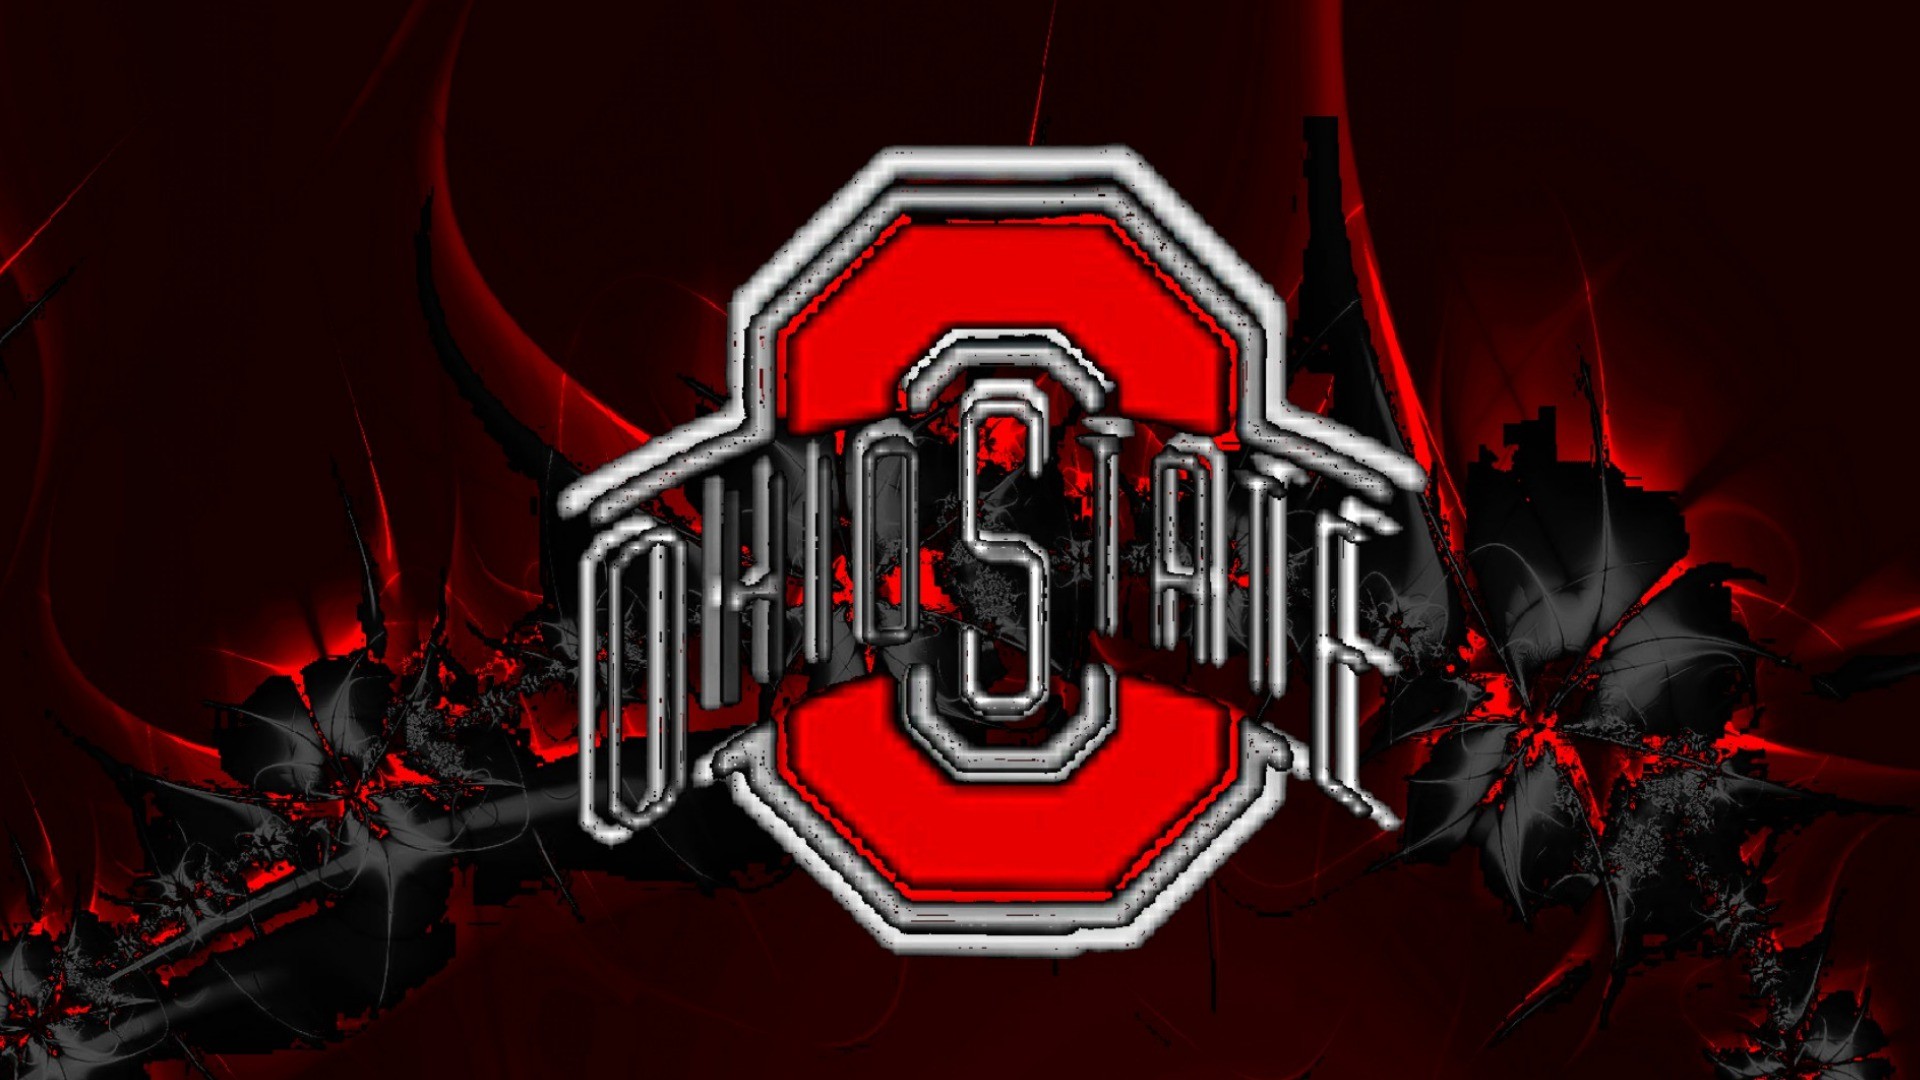 1920x1080 Ohio State Football Background Wallpaper | HD Wallpapers | Pinterest | Hd  wallpaper and Wallpaper